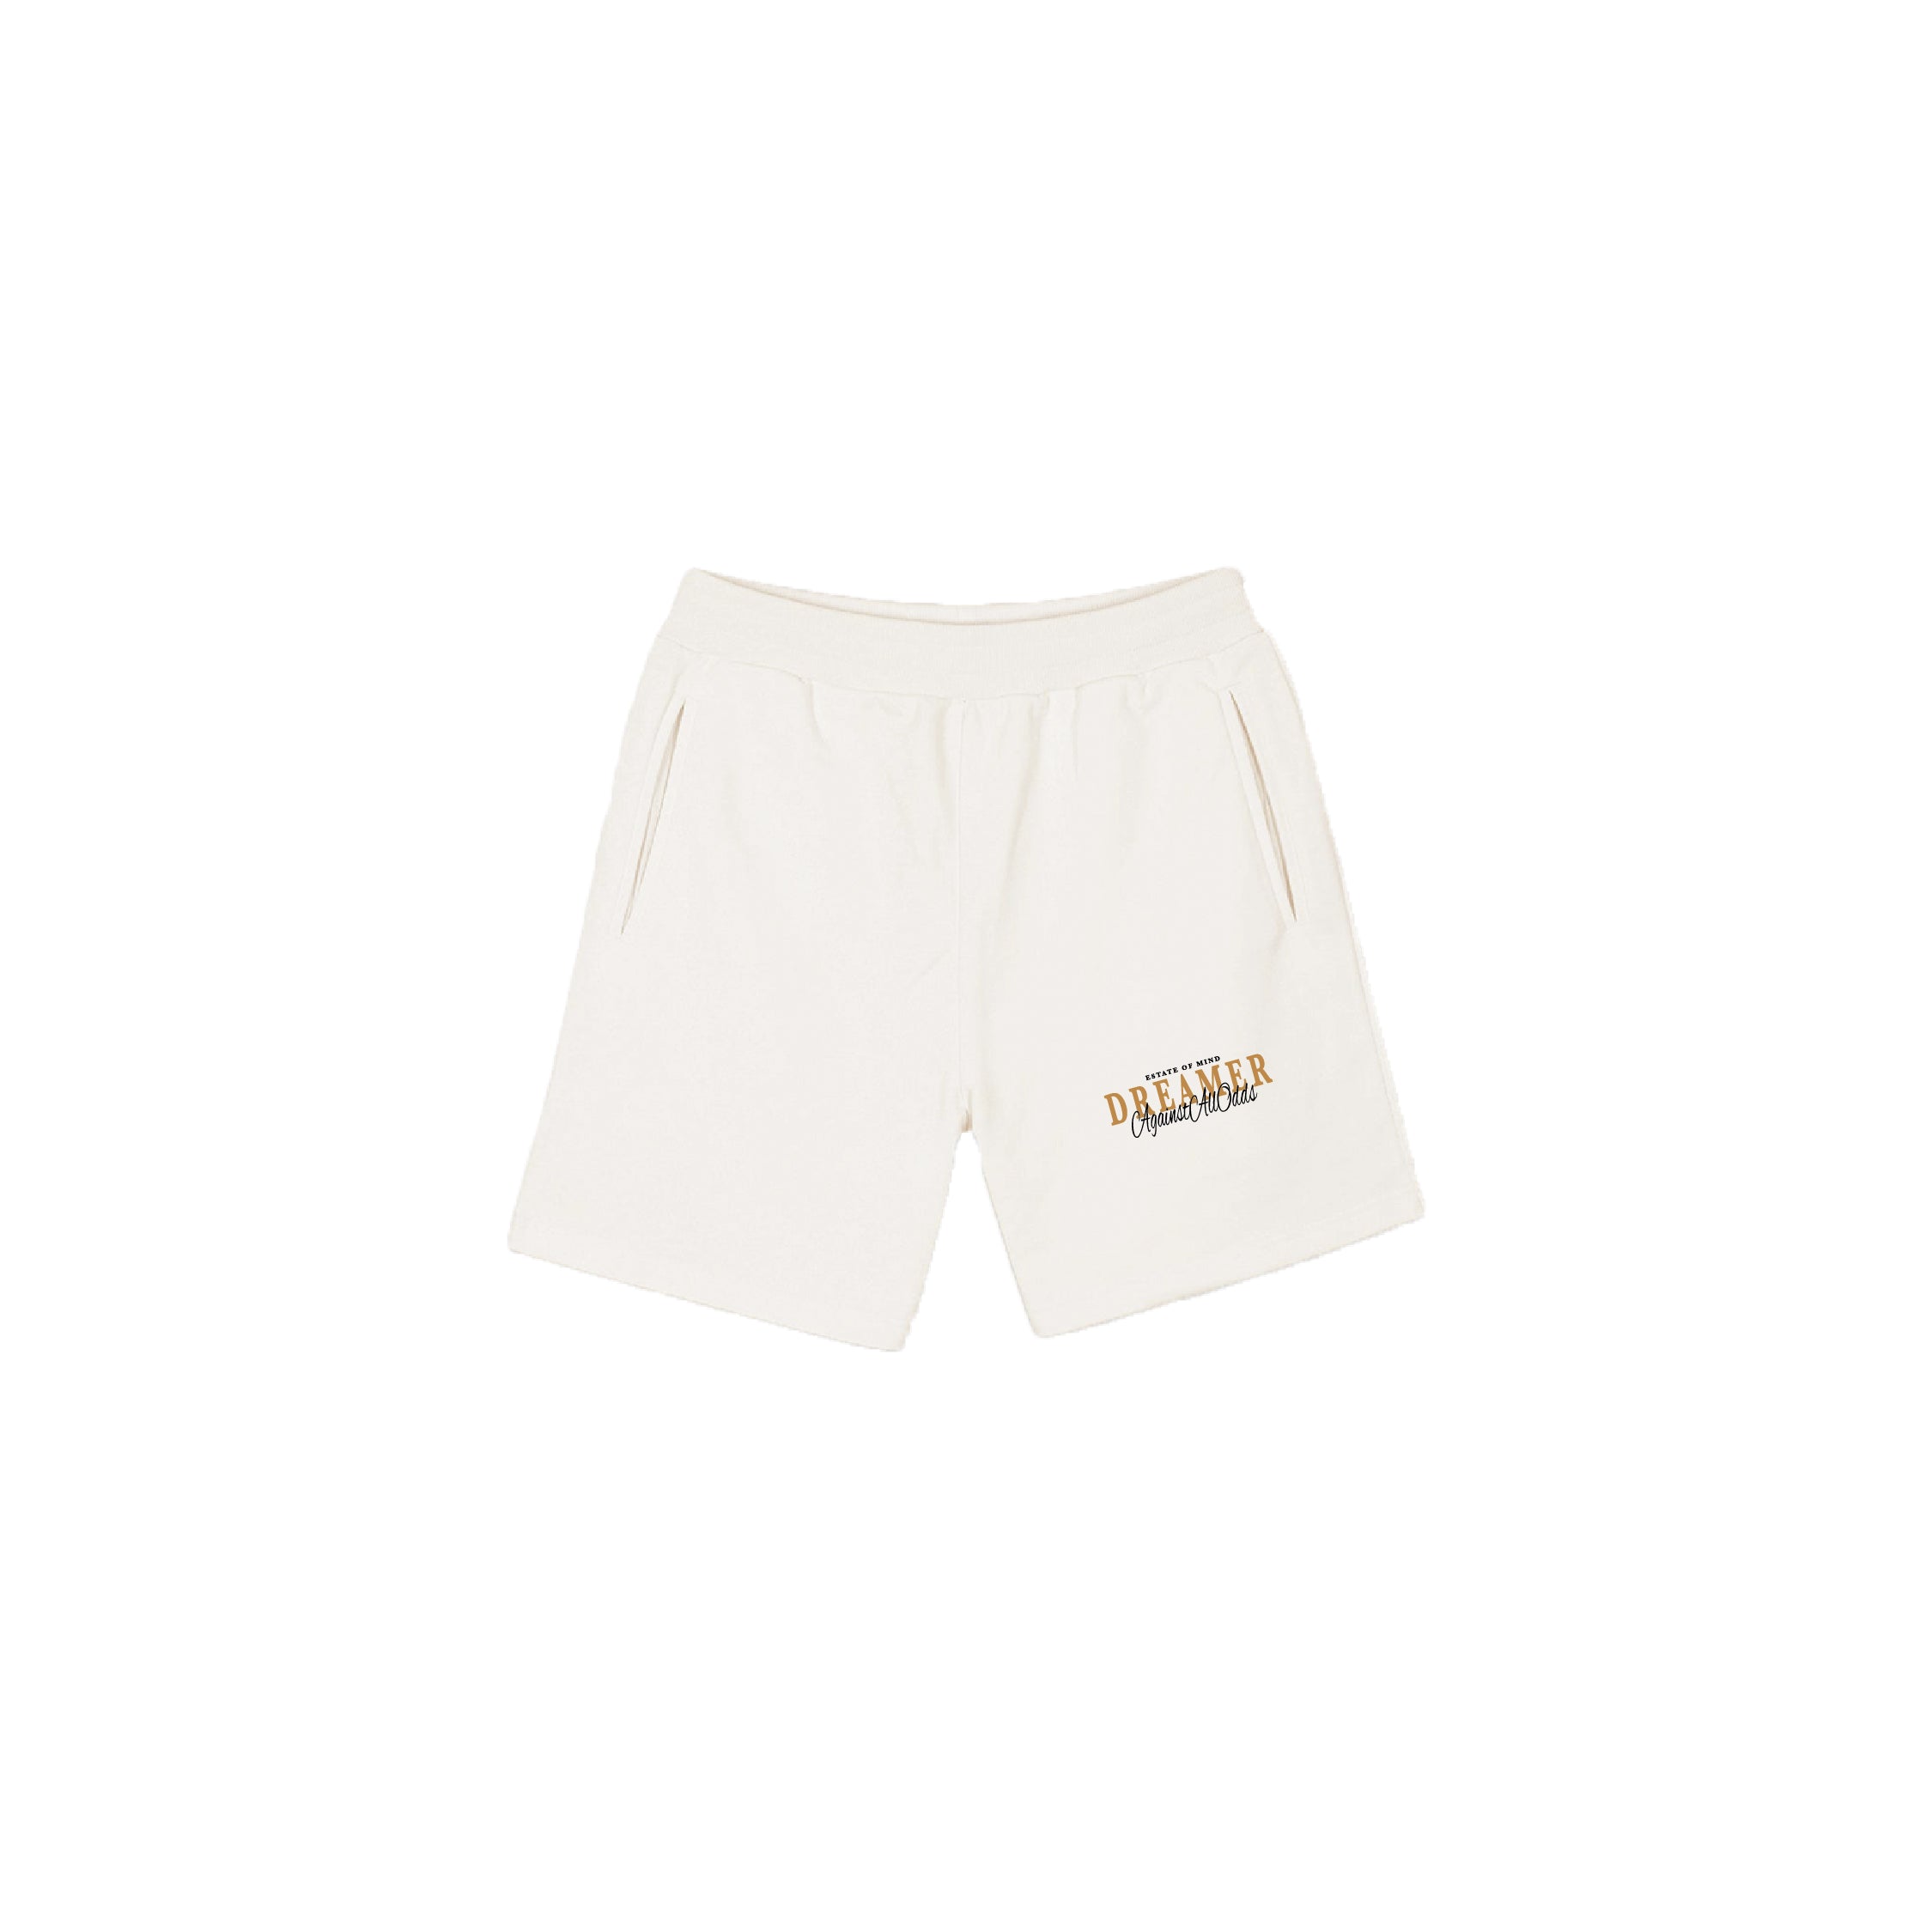 ESTATE OF MIND FRENCH TERRY SHORTS - VINTAGE WHITE